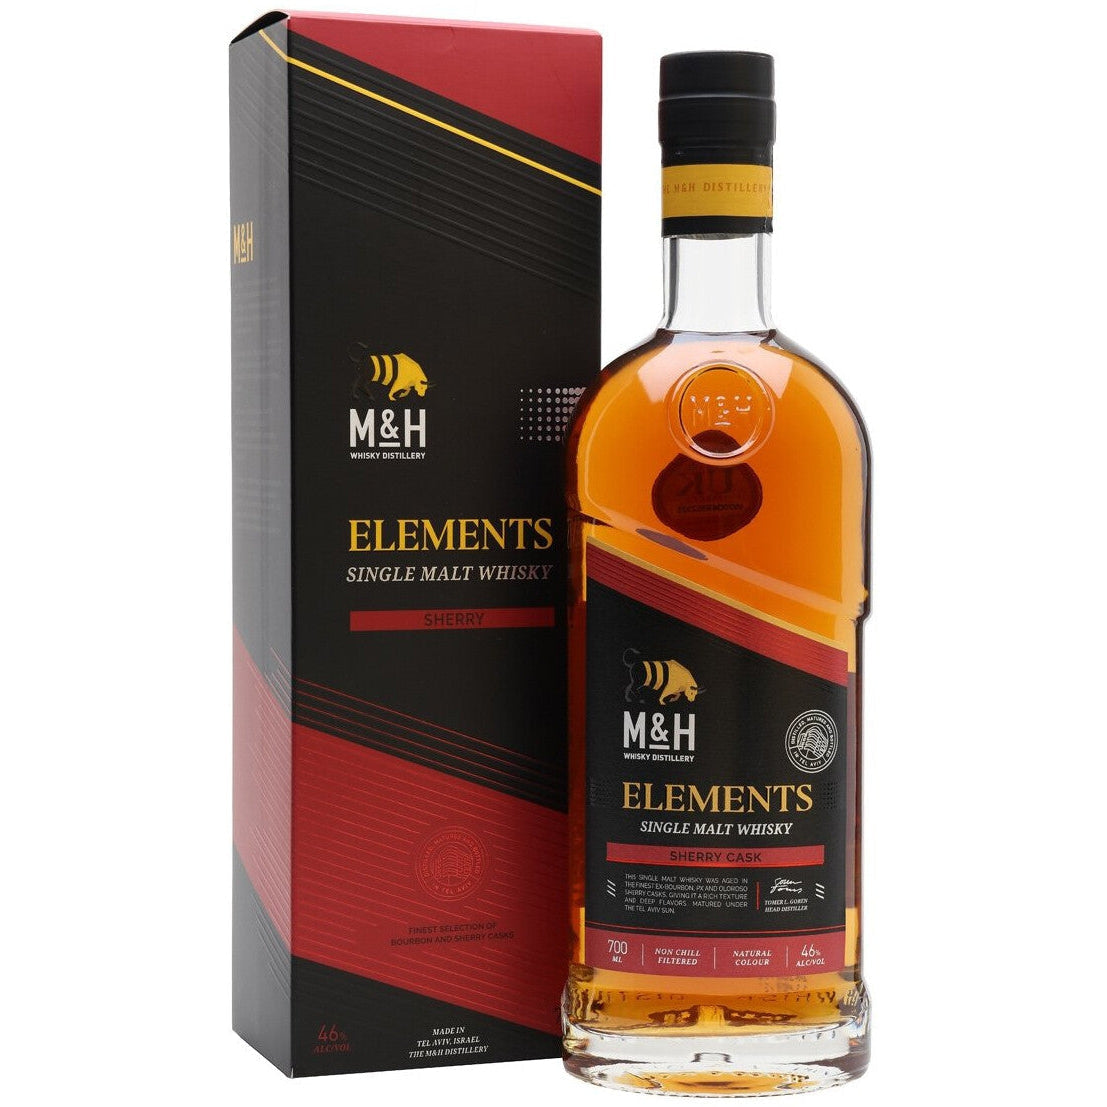 M&H+ELEMENTS+Sherry+Cask+Single+Malt+Whisky+46%+Vol.+0,7l+in+Giftbox